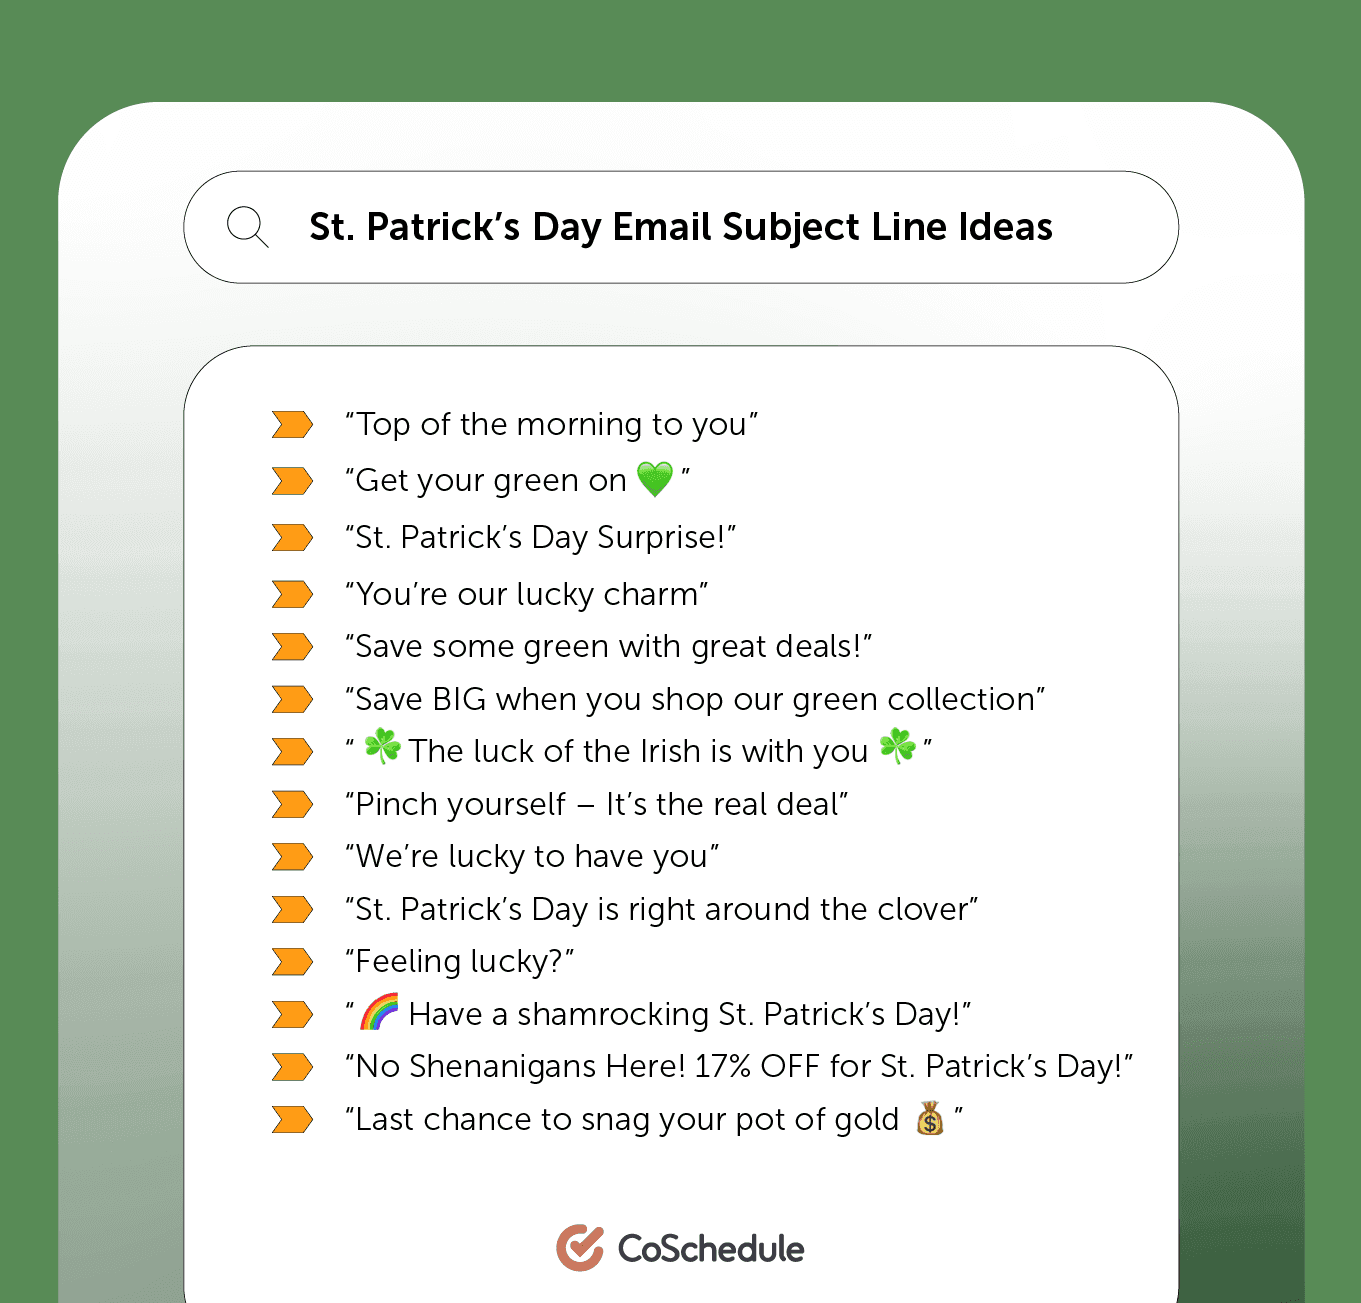 St. Patrick's day email subject line ideas from CoSchedule.